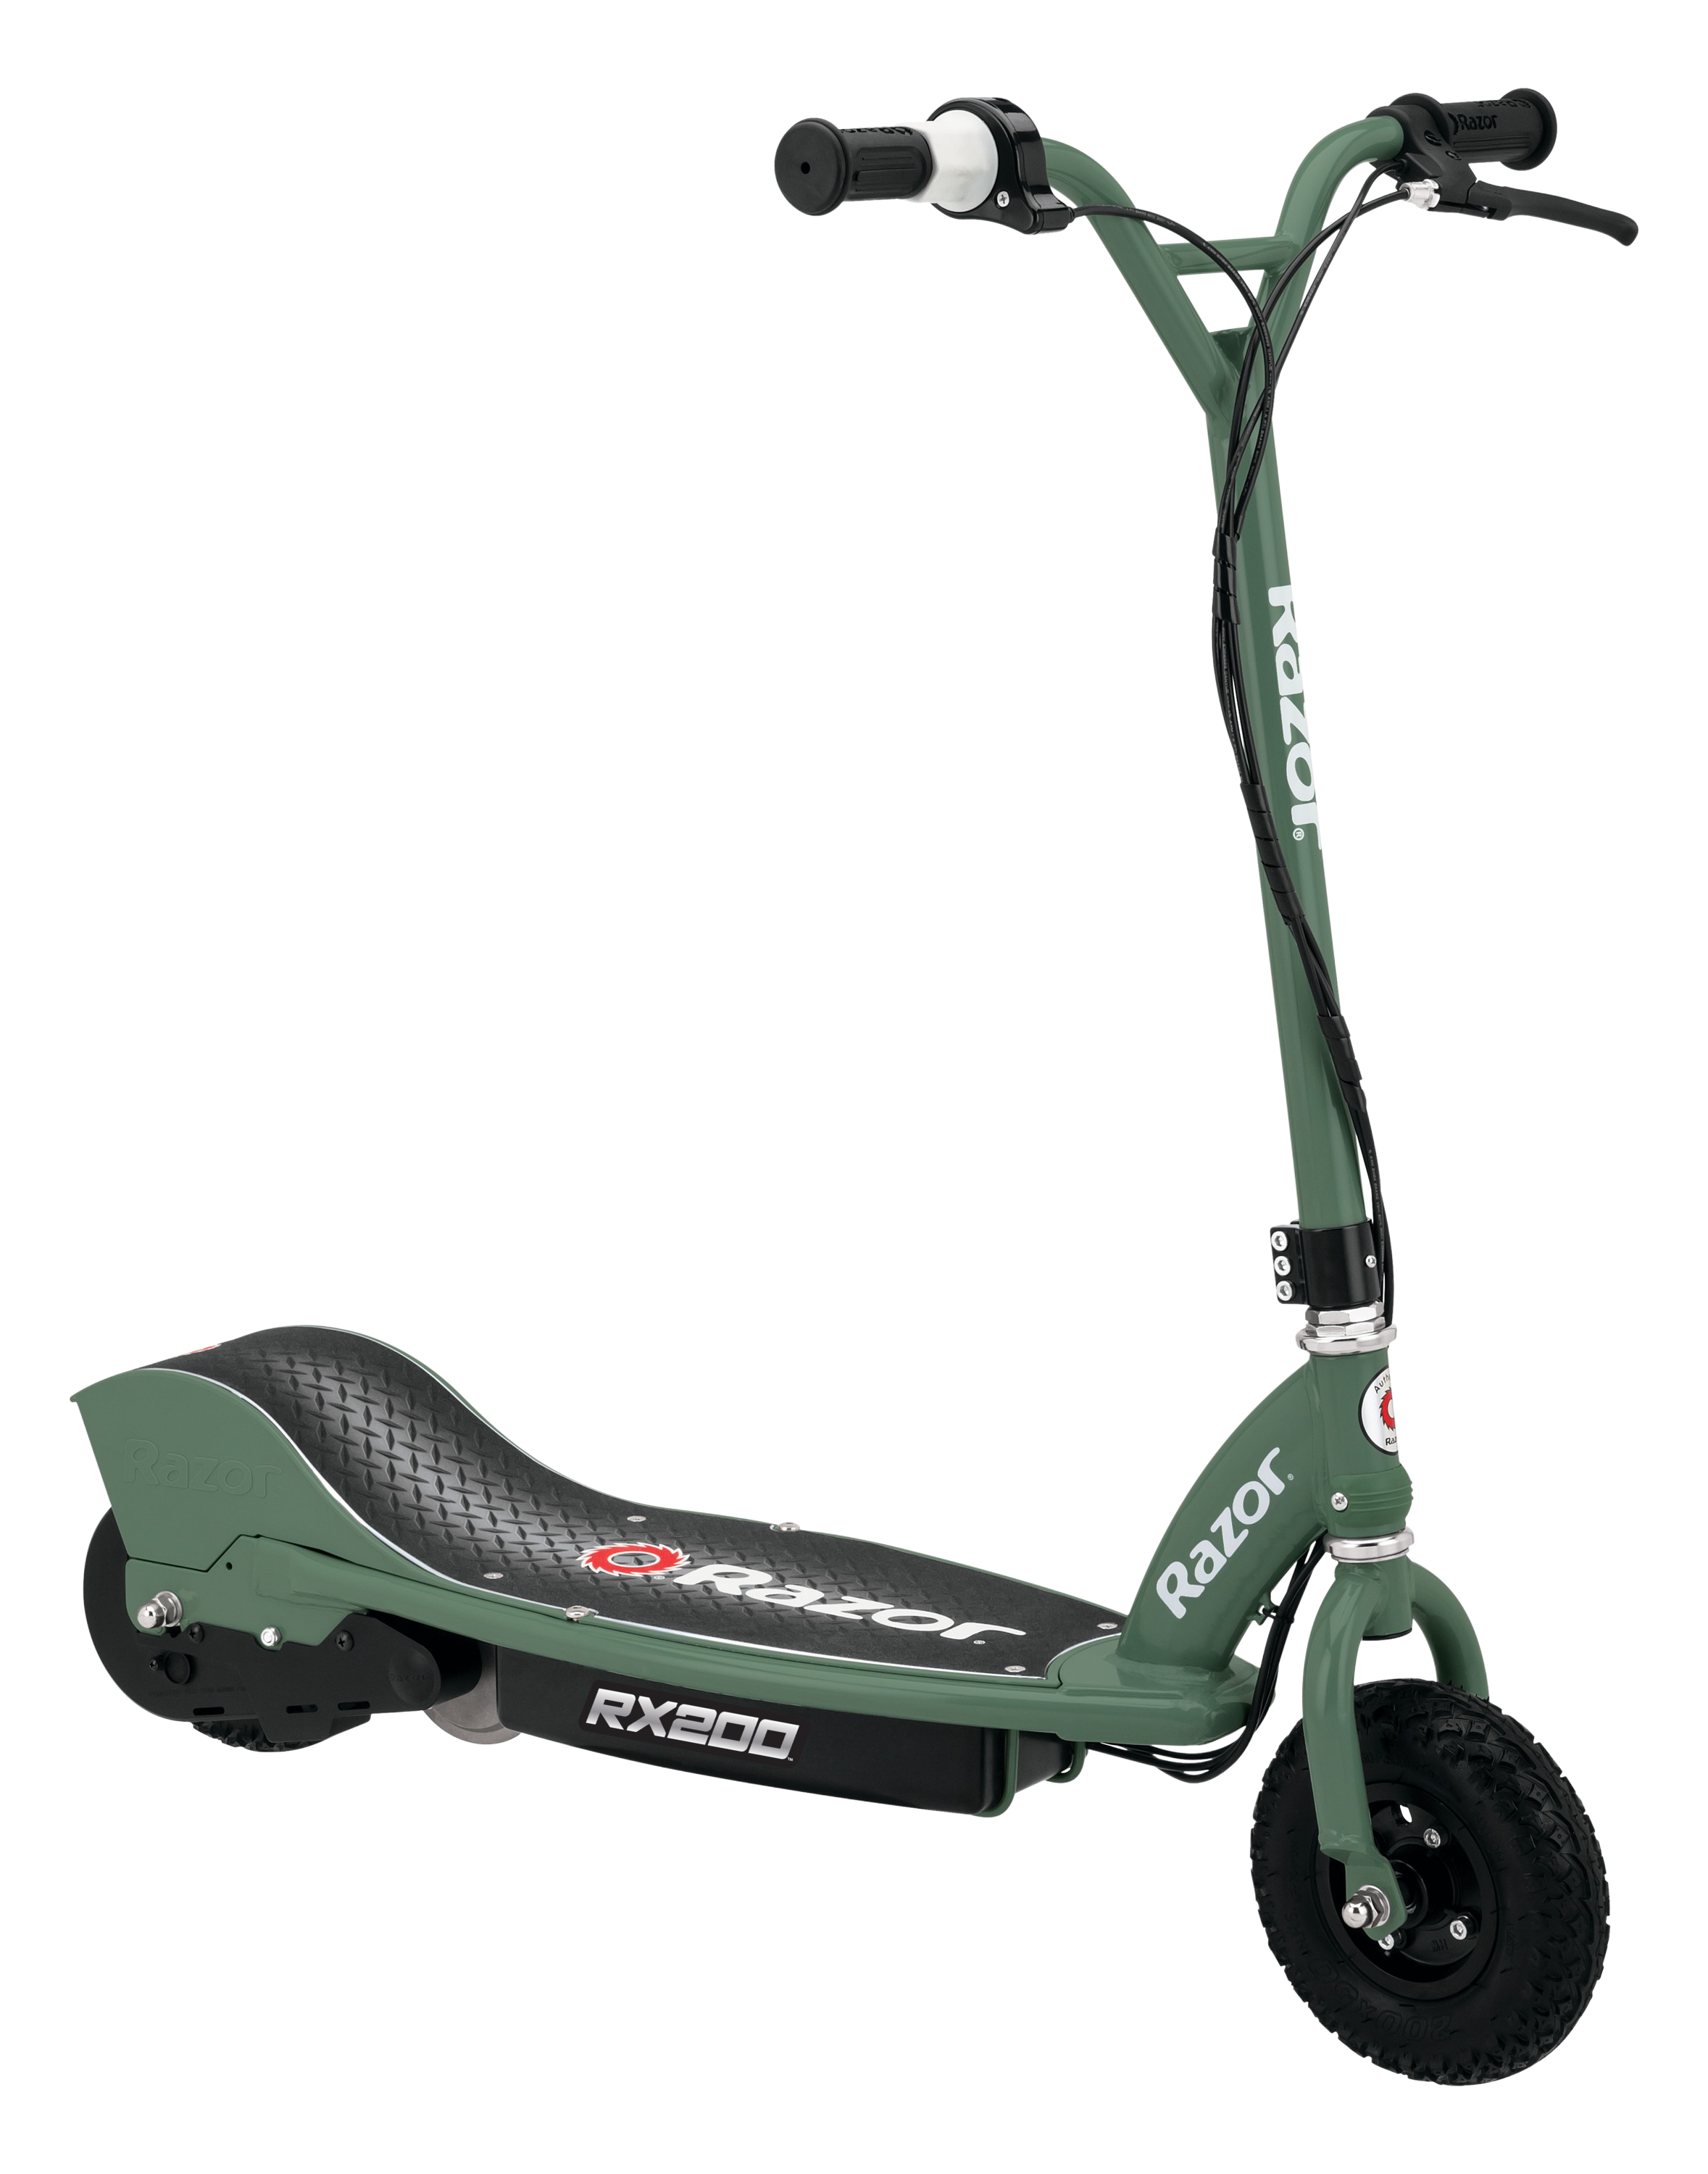 Razor, Razor RX200 Up to 8 Mile Range 12 MPH Heavy Duty Off Road Tires Electric Scooter Green New